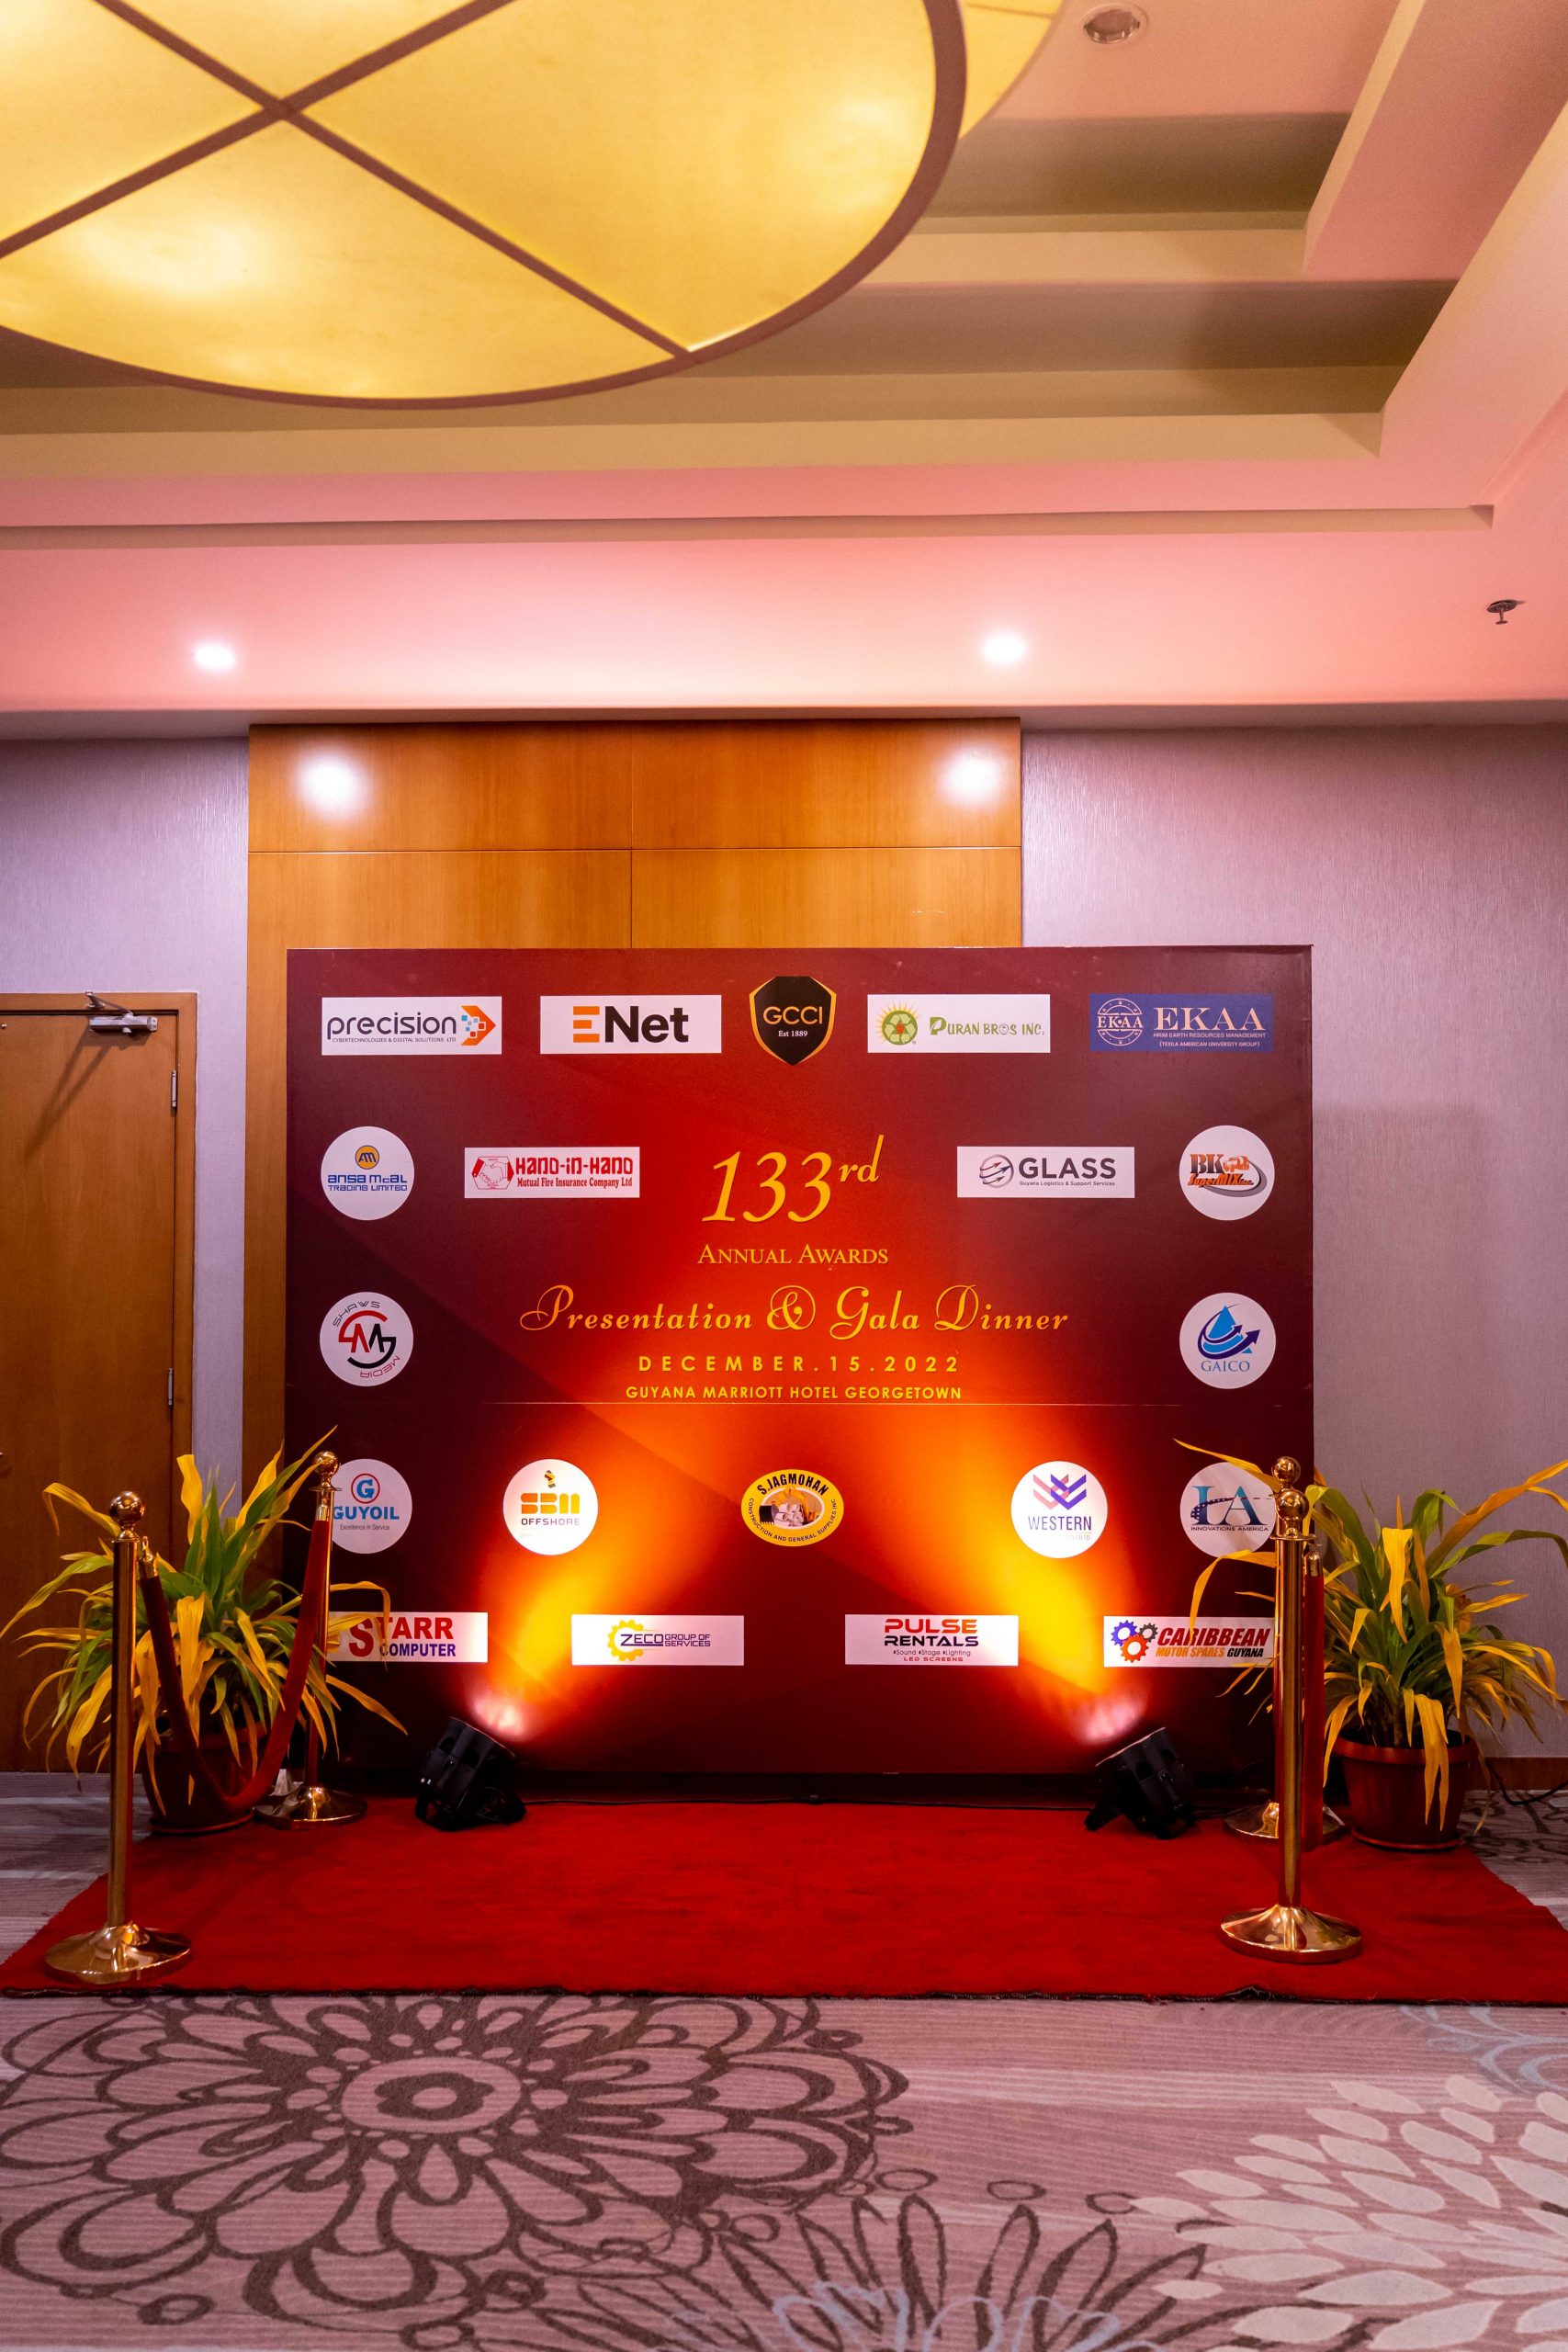 GCCI’s Hosts 133rd Annual Awards Presentation and Gala Dinner.